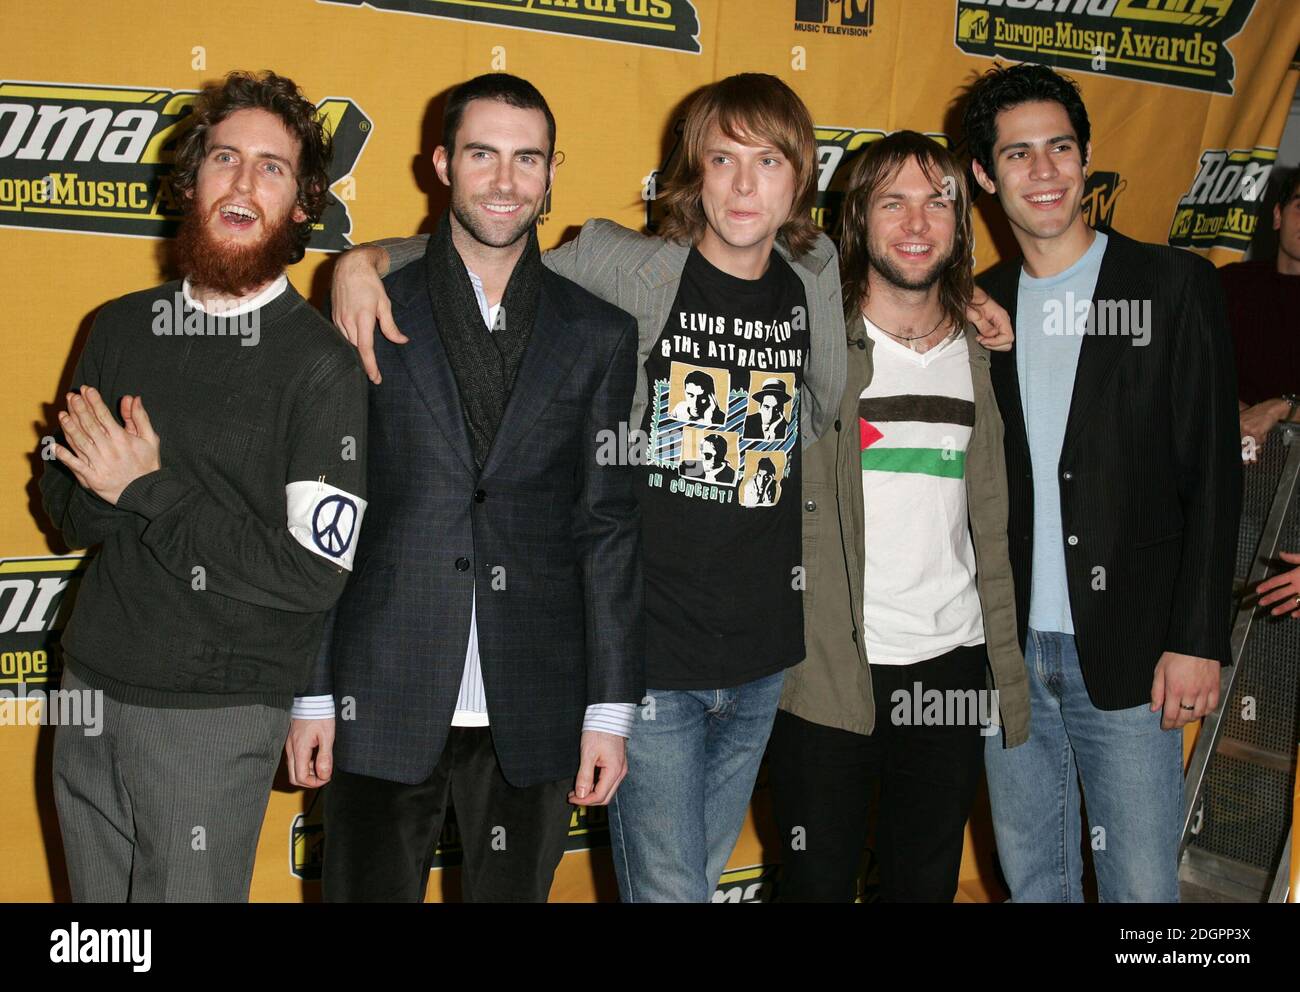 Maroon 5 attending the MTV Europe Music Awards 2004 in Rome, Italy. Doug Peters/allactiondigital.com  Stock Photo